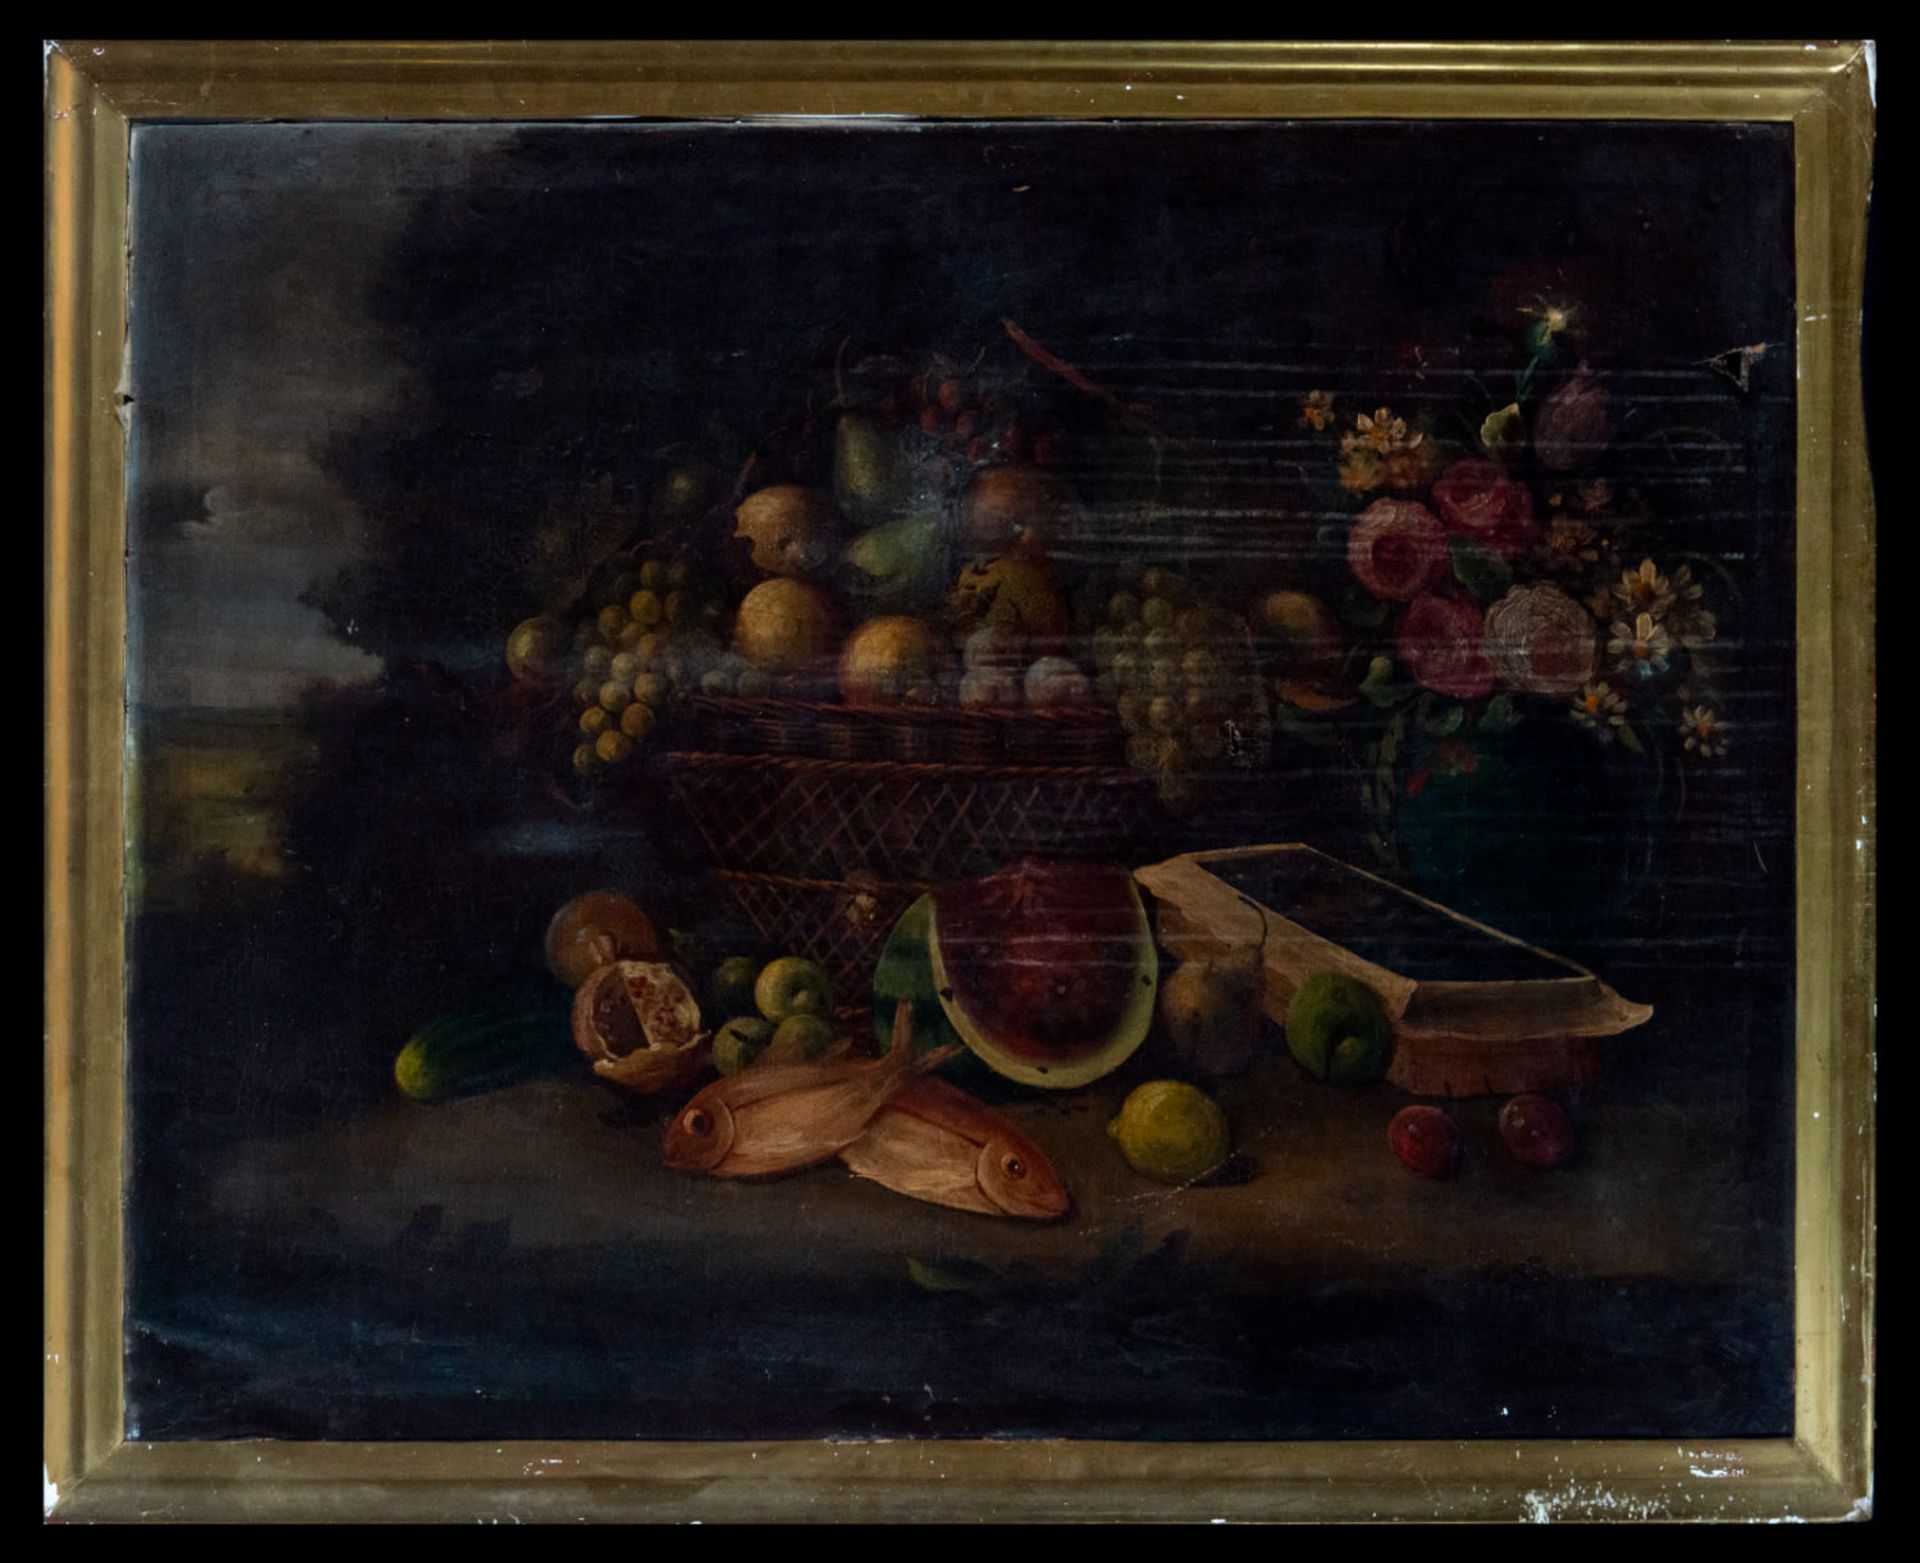 Baroque Italian Still Life of Fish and Fruits from the 18th century